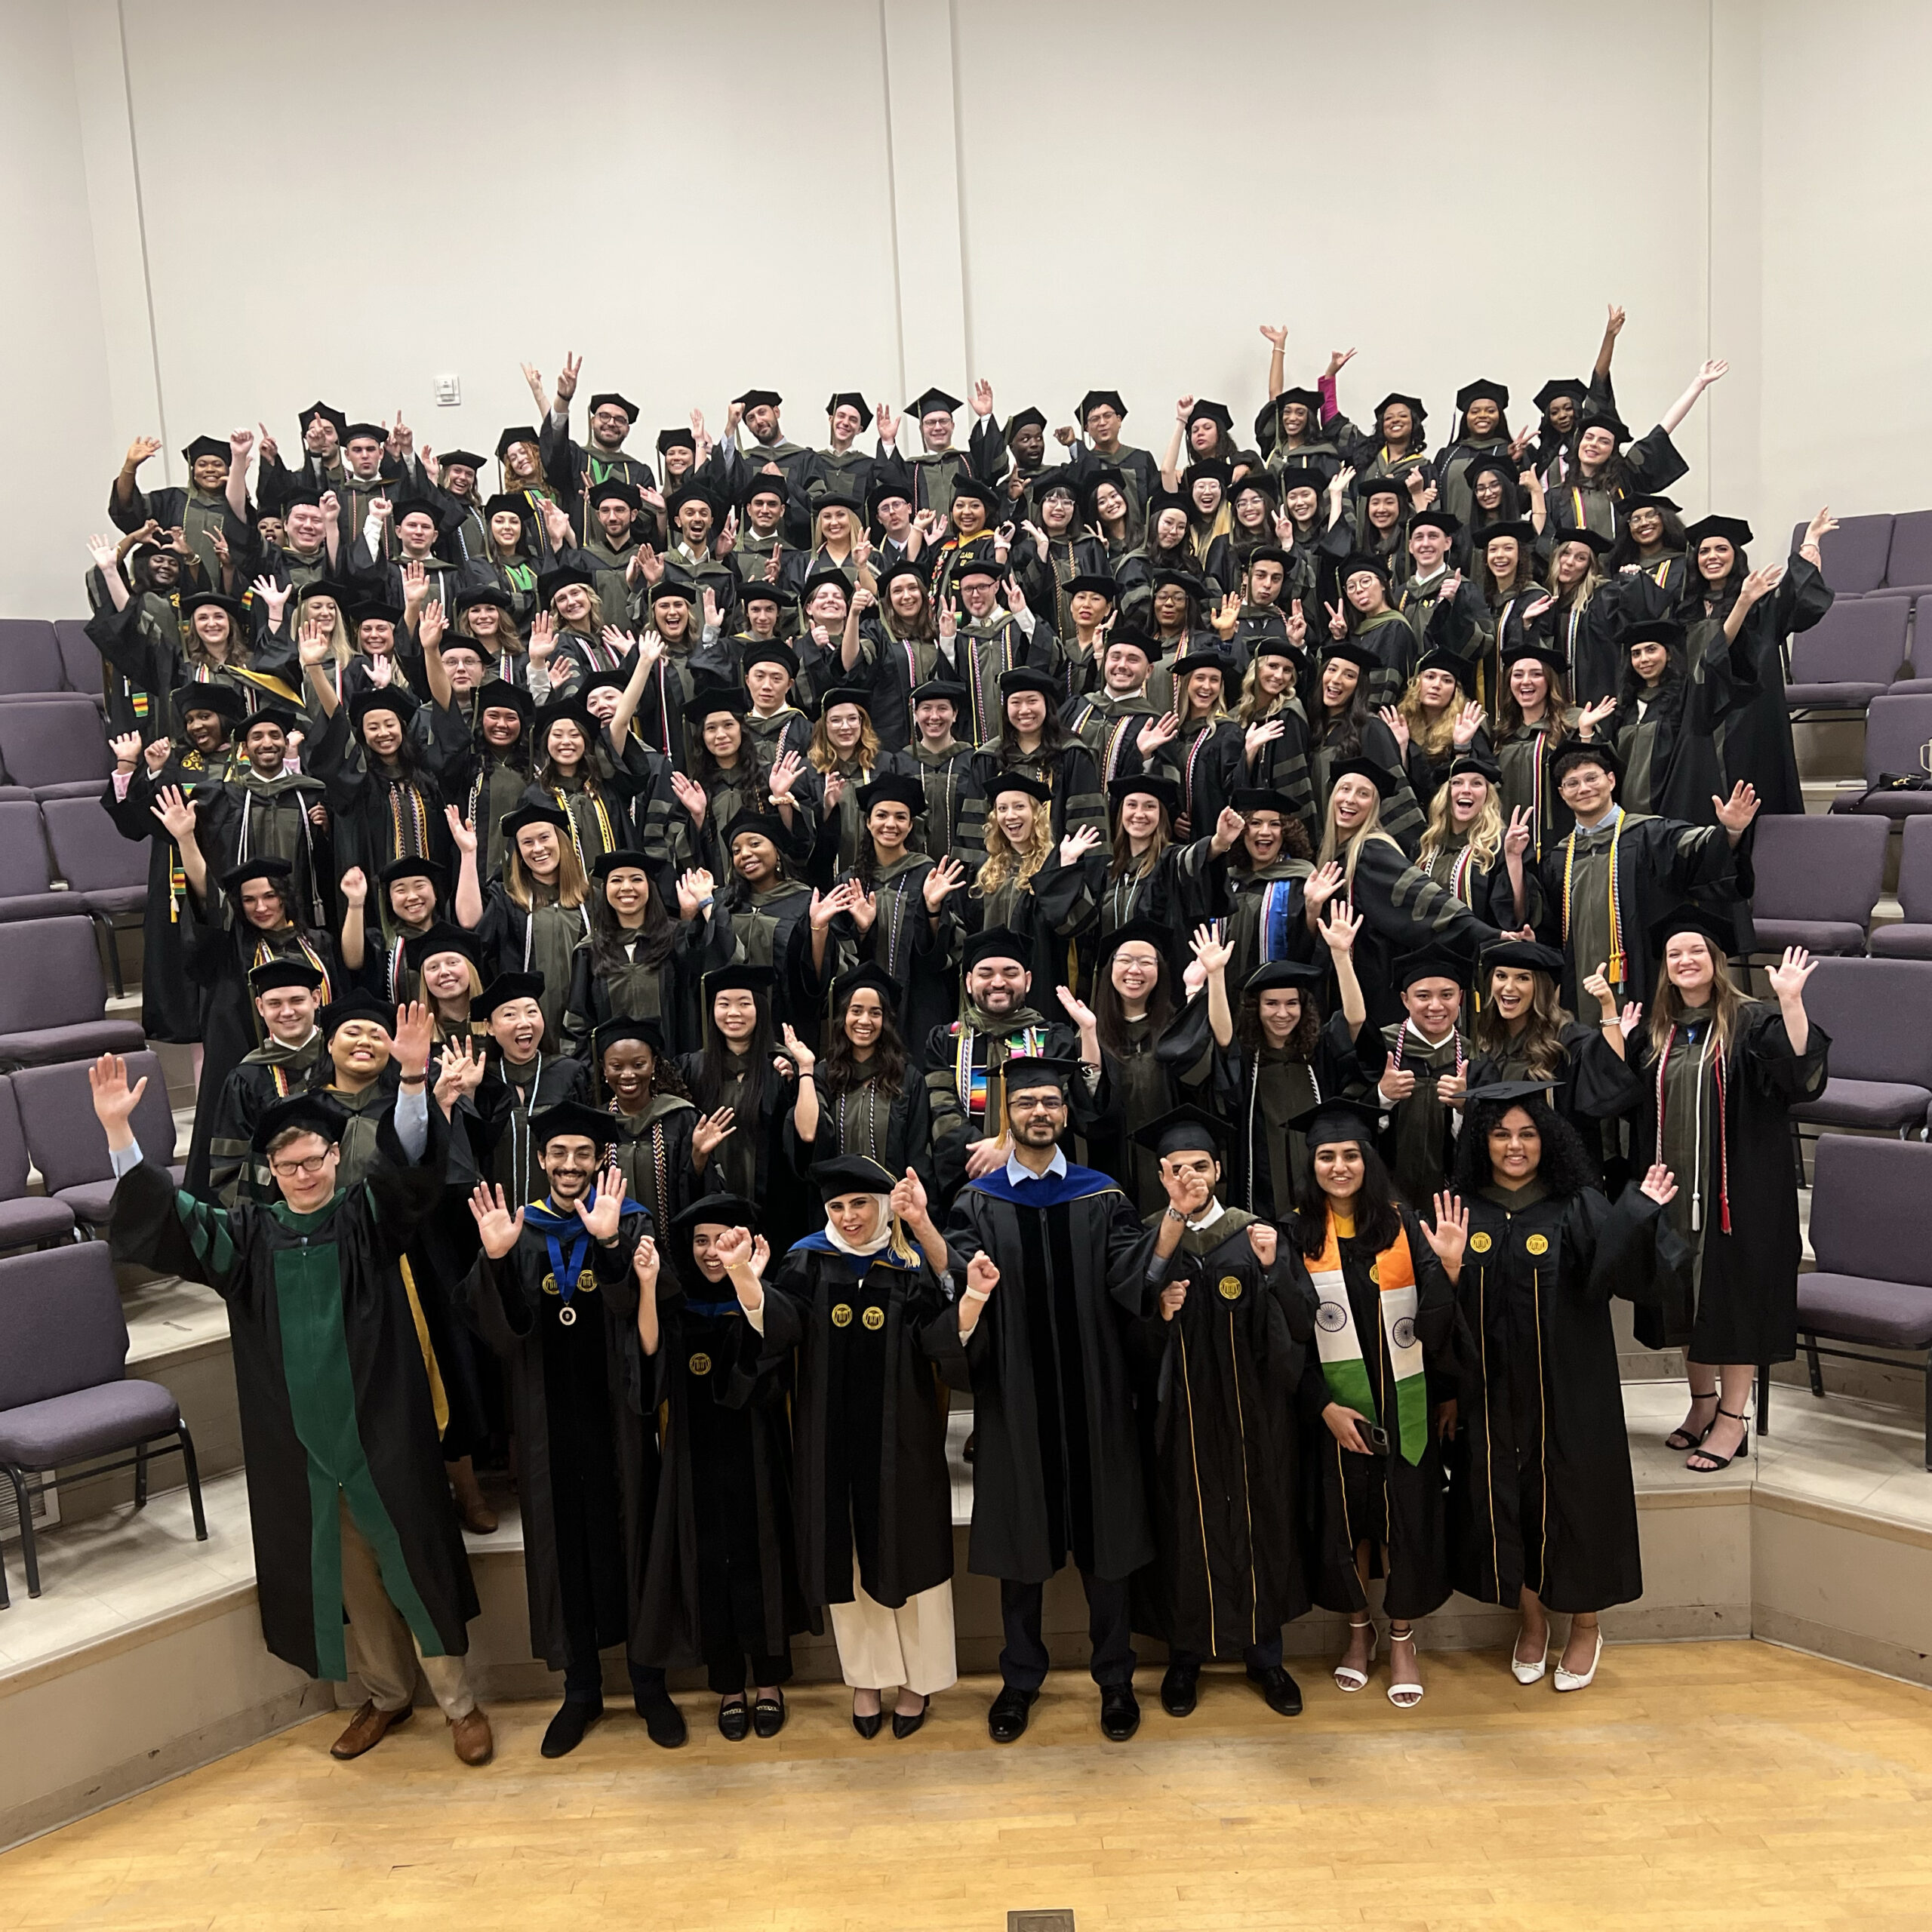 The Class of 2024, standing on risers, pose for a celebratory photo before the VCU School of Pharmacy Hooding and Diploma Ceremony.